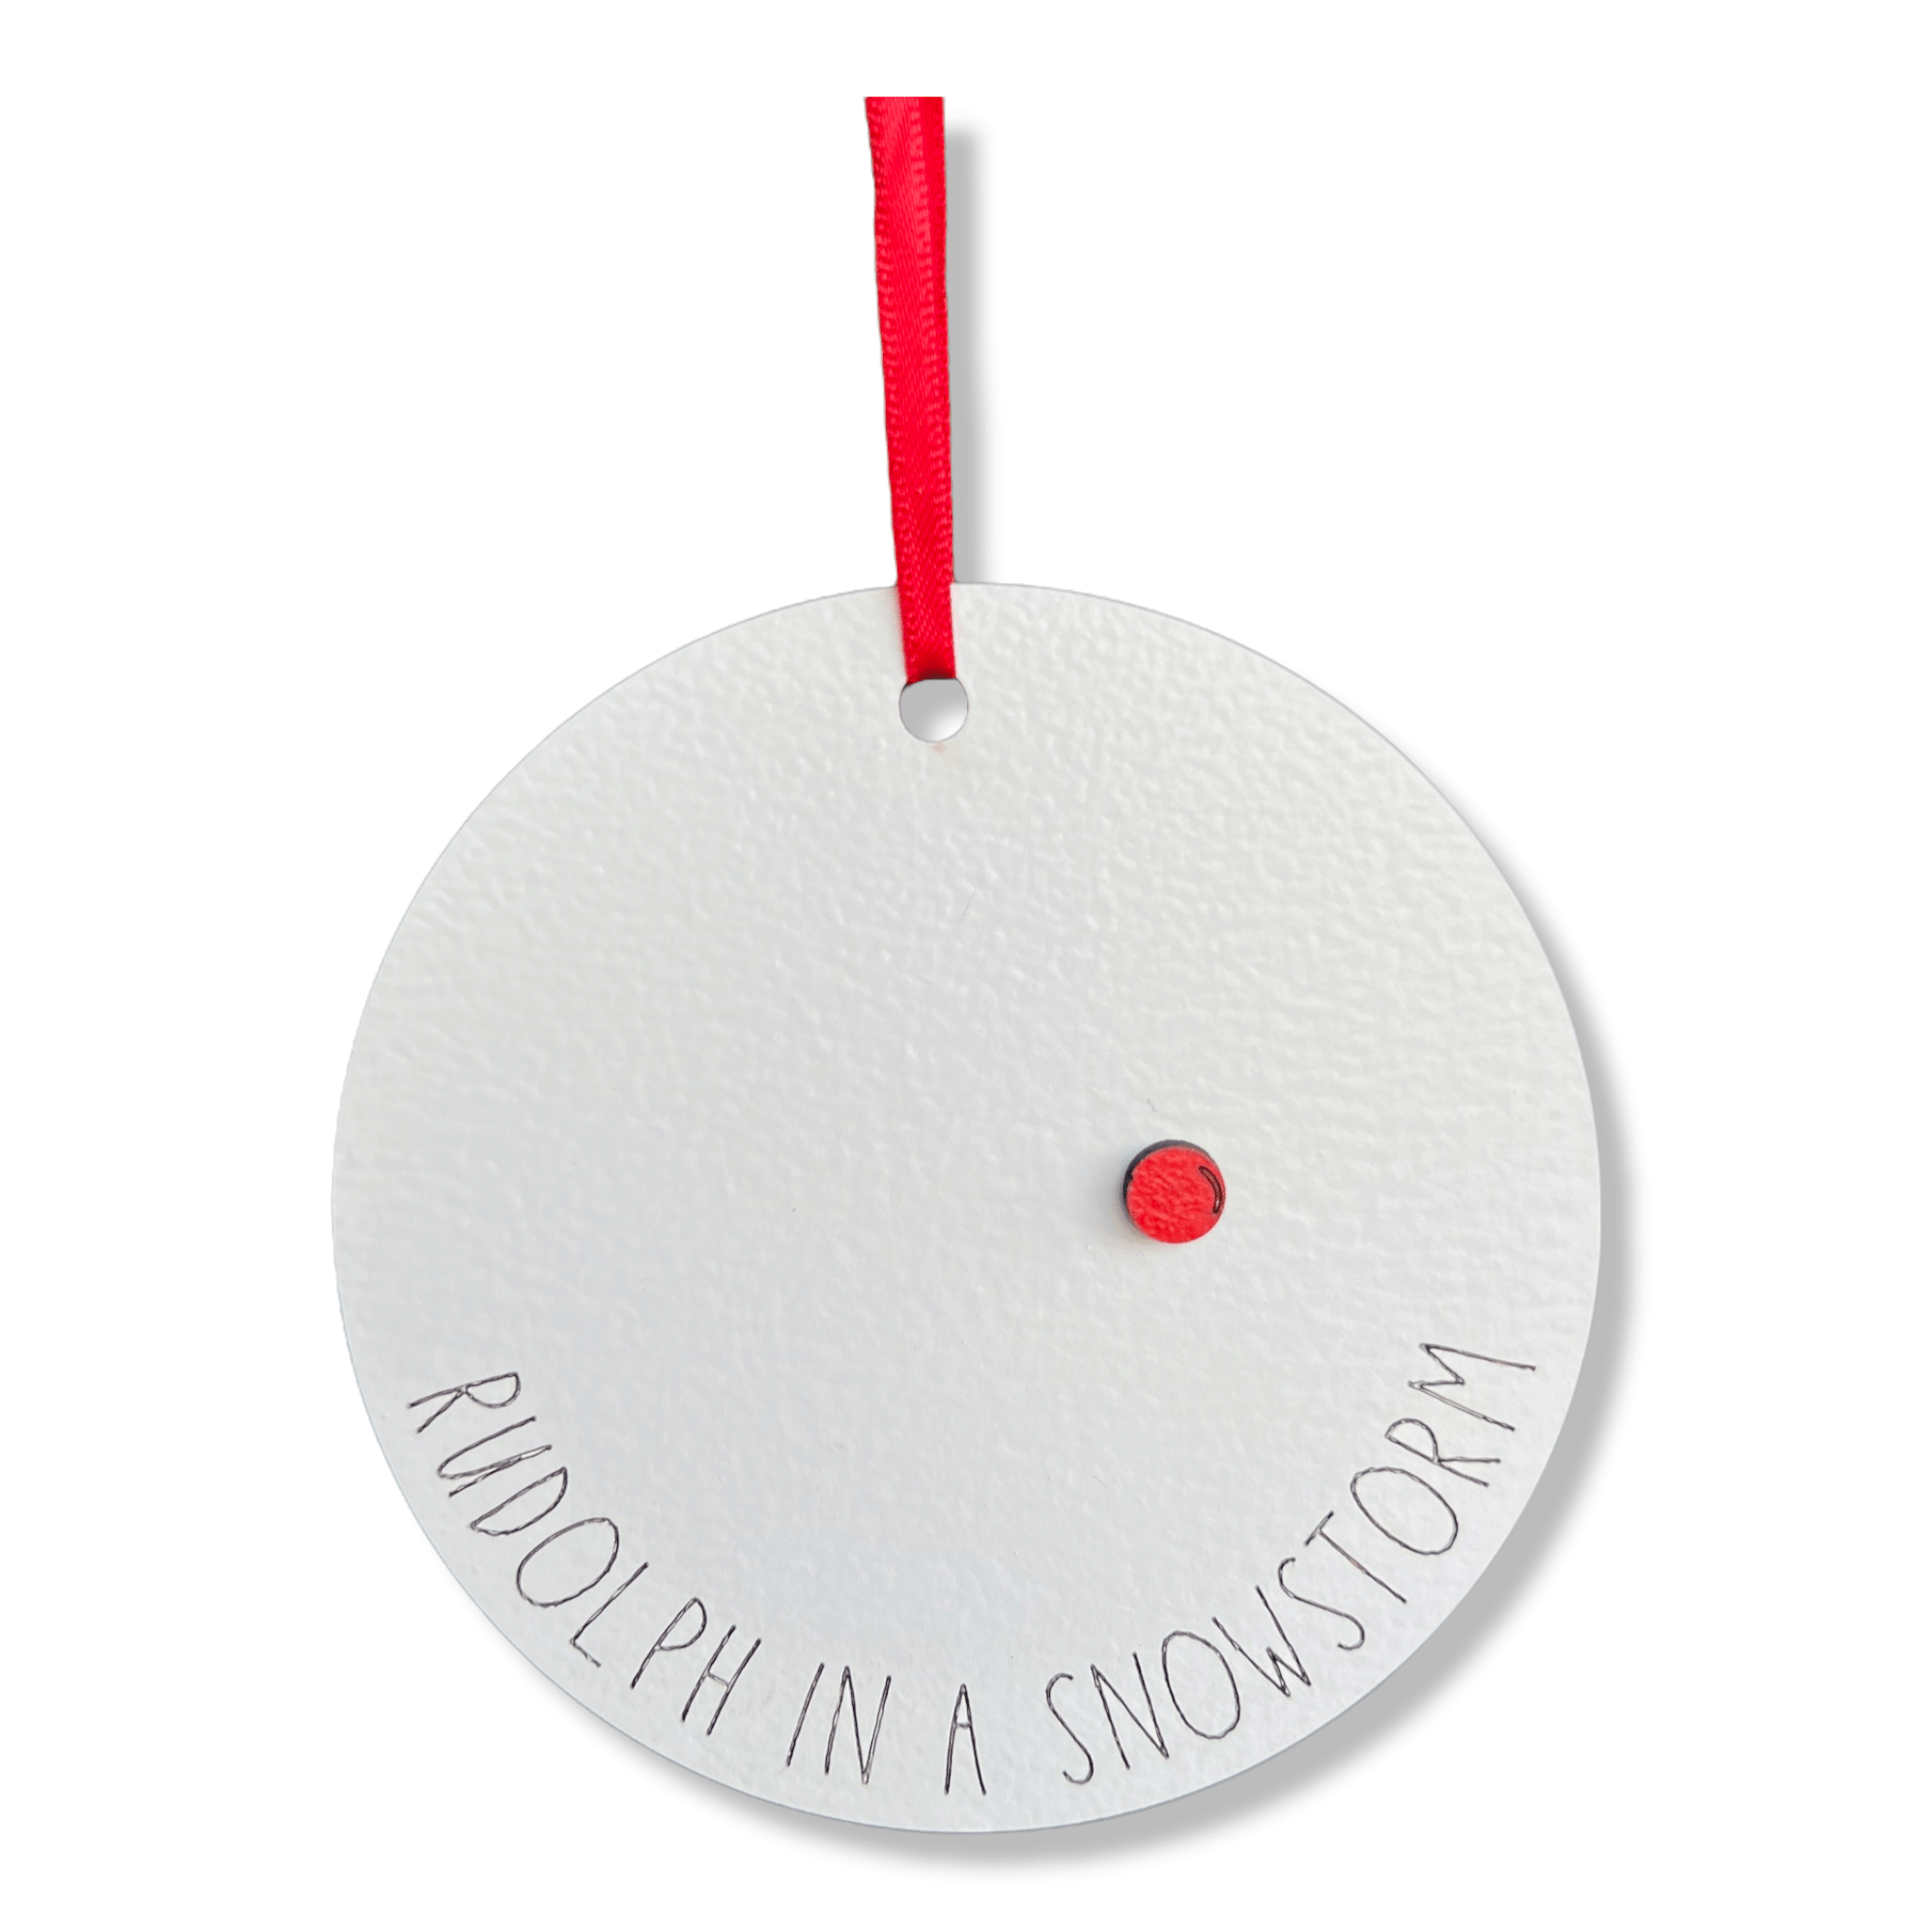 Rudolph in a Snowstorm Ornament